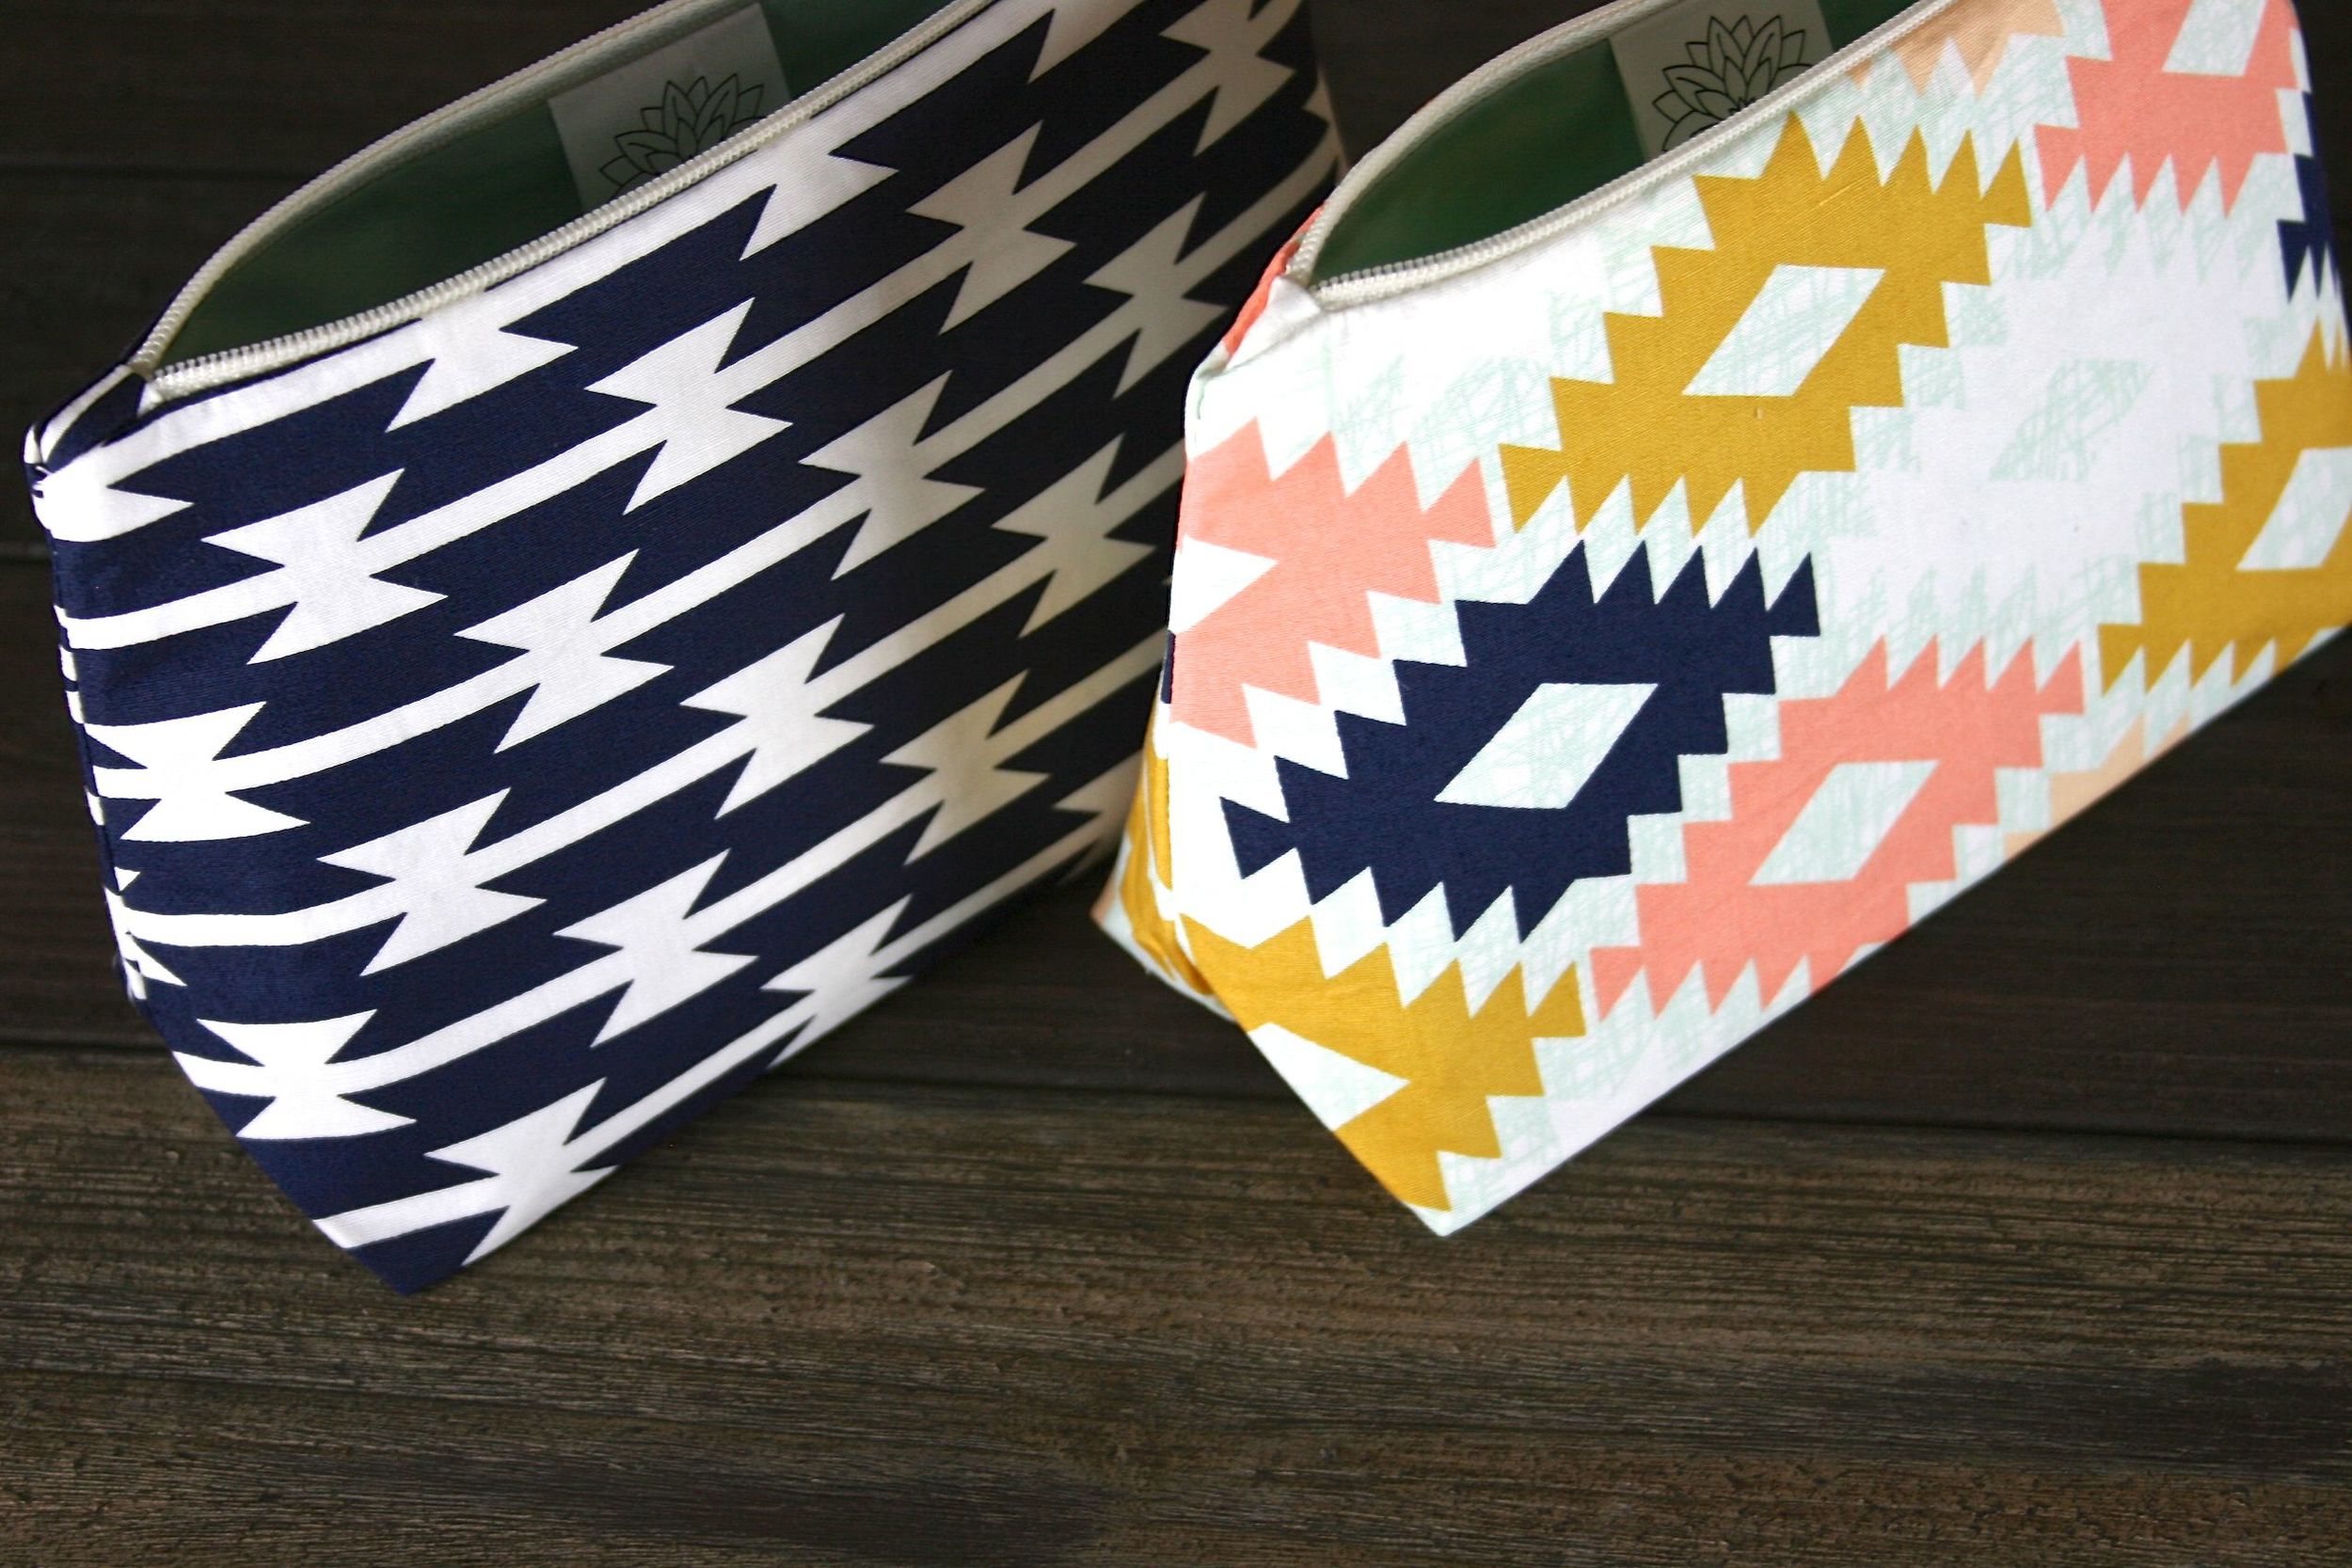 Agave Southwest & Navy and White Southwest Geometric Cosmetic Bags - Le Pique Nique by Jordani Sarreal.jpg